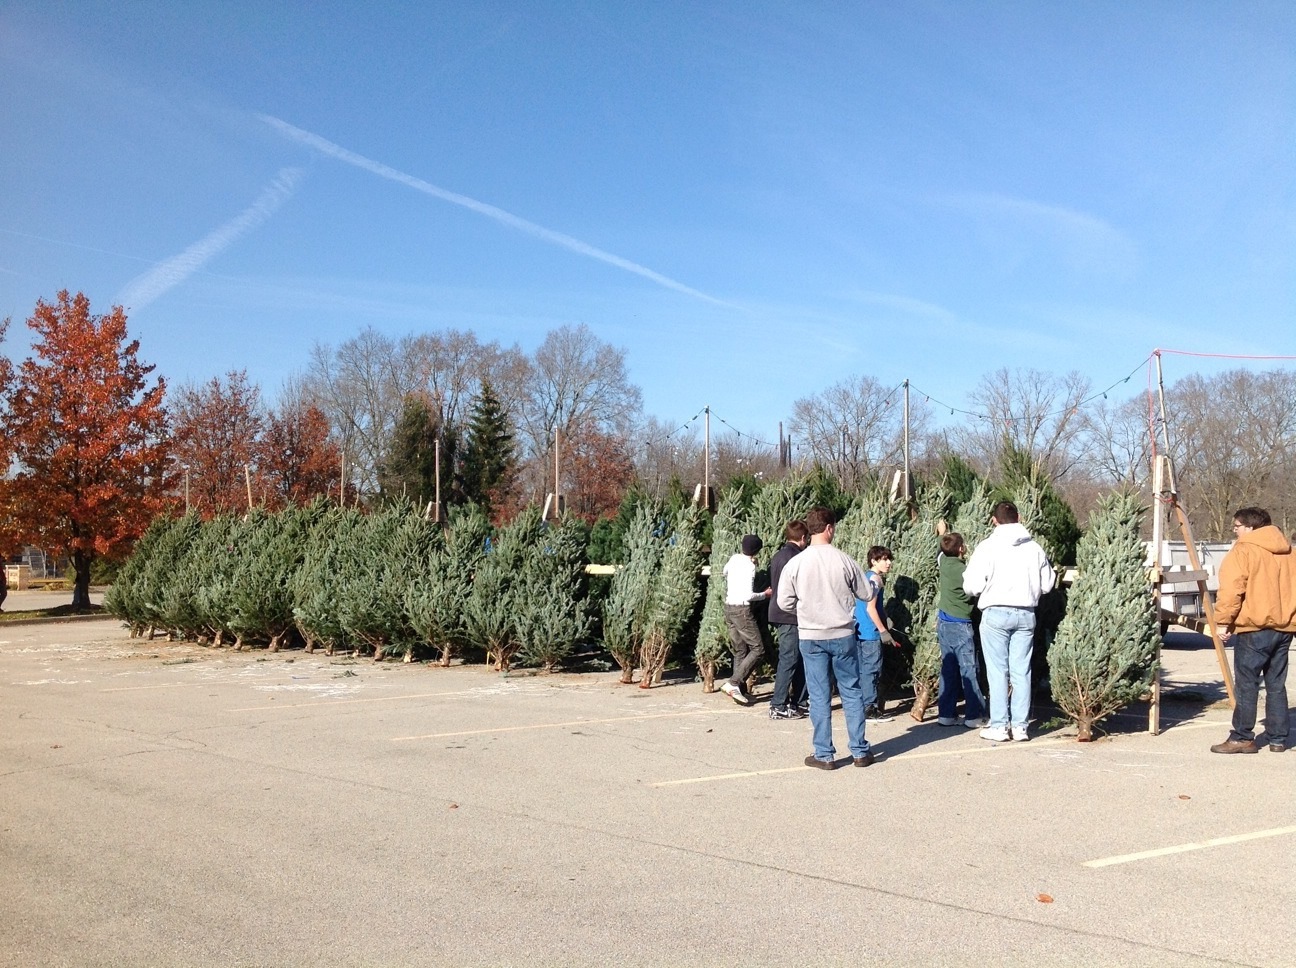 “Last year we sold 225 trees and 452 wreaths,” said troop volunteer Jim Badger. “We have 255 trees ordered for this year, 30 more than last year.” (Submitted photo)